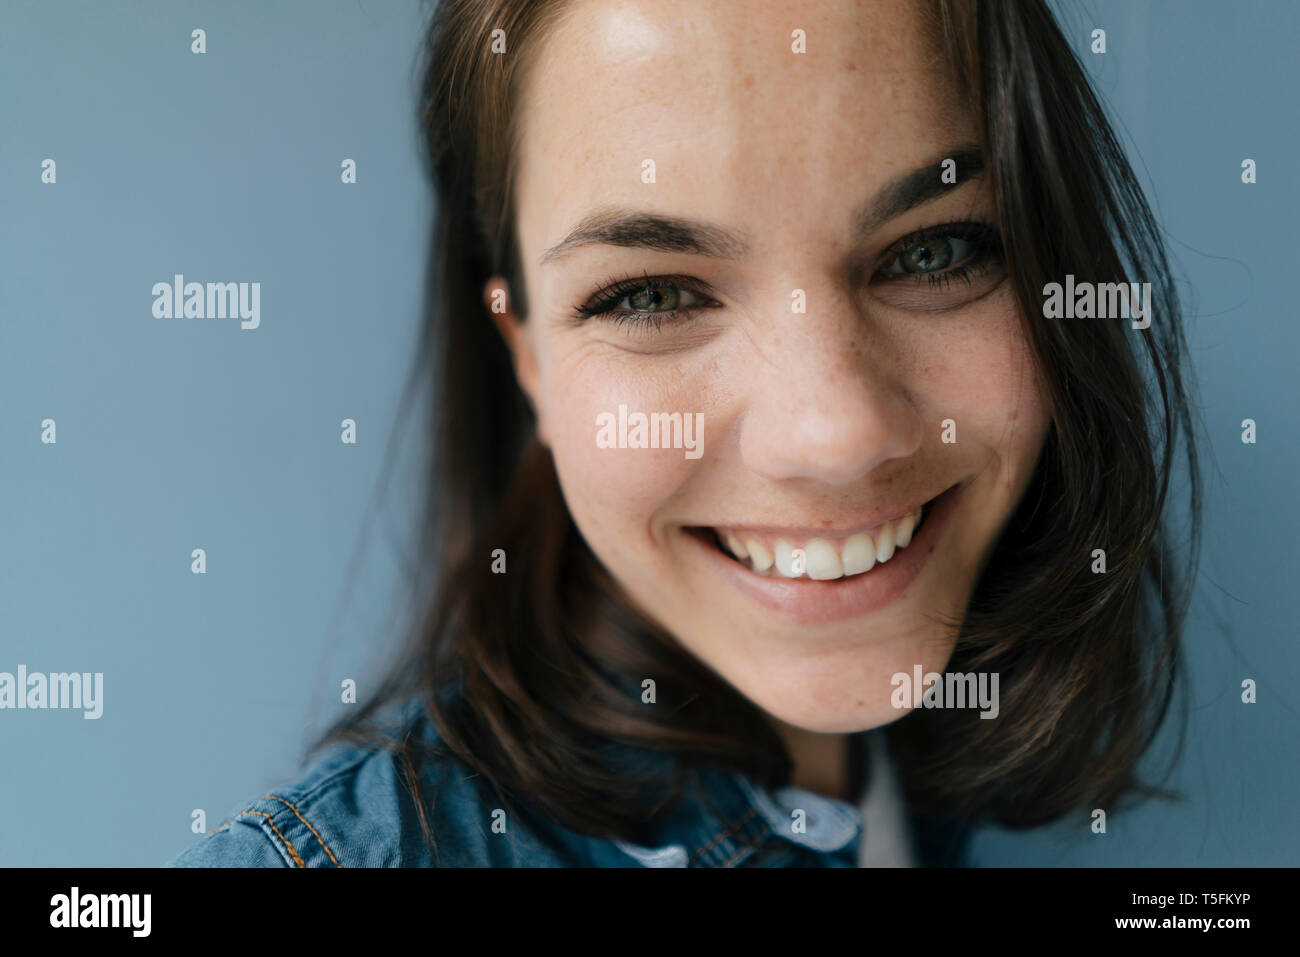 Portrait of a woman, smiling happily Stock Photo